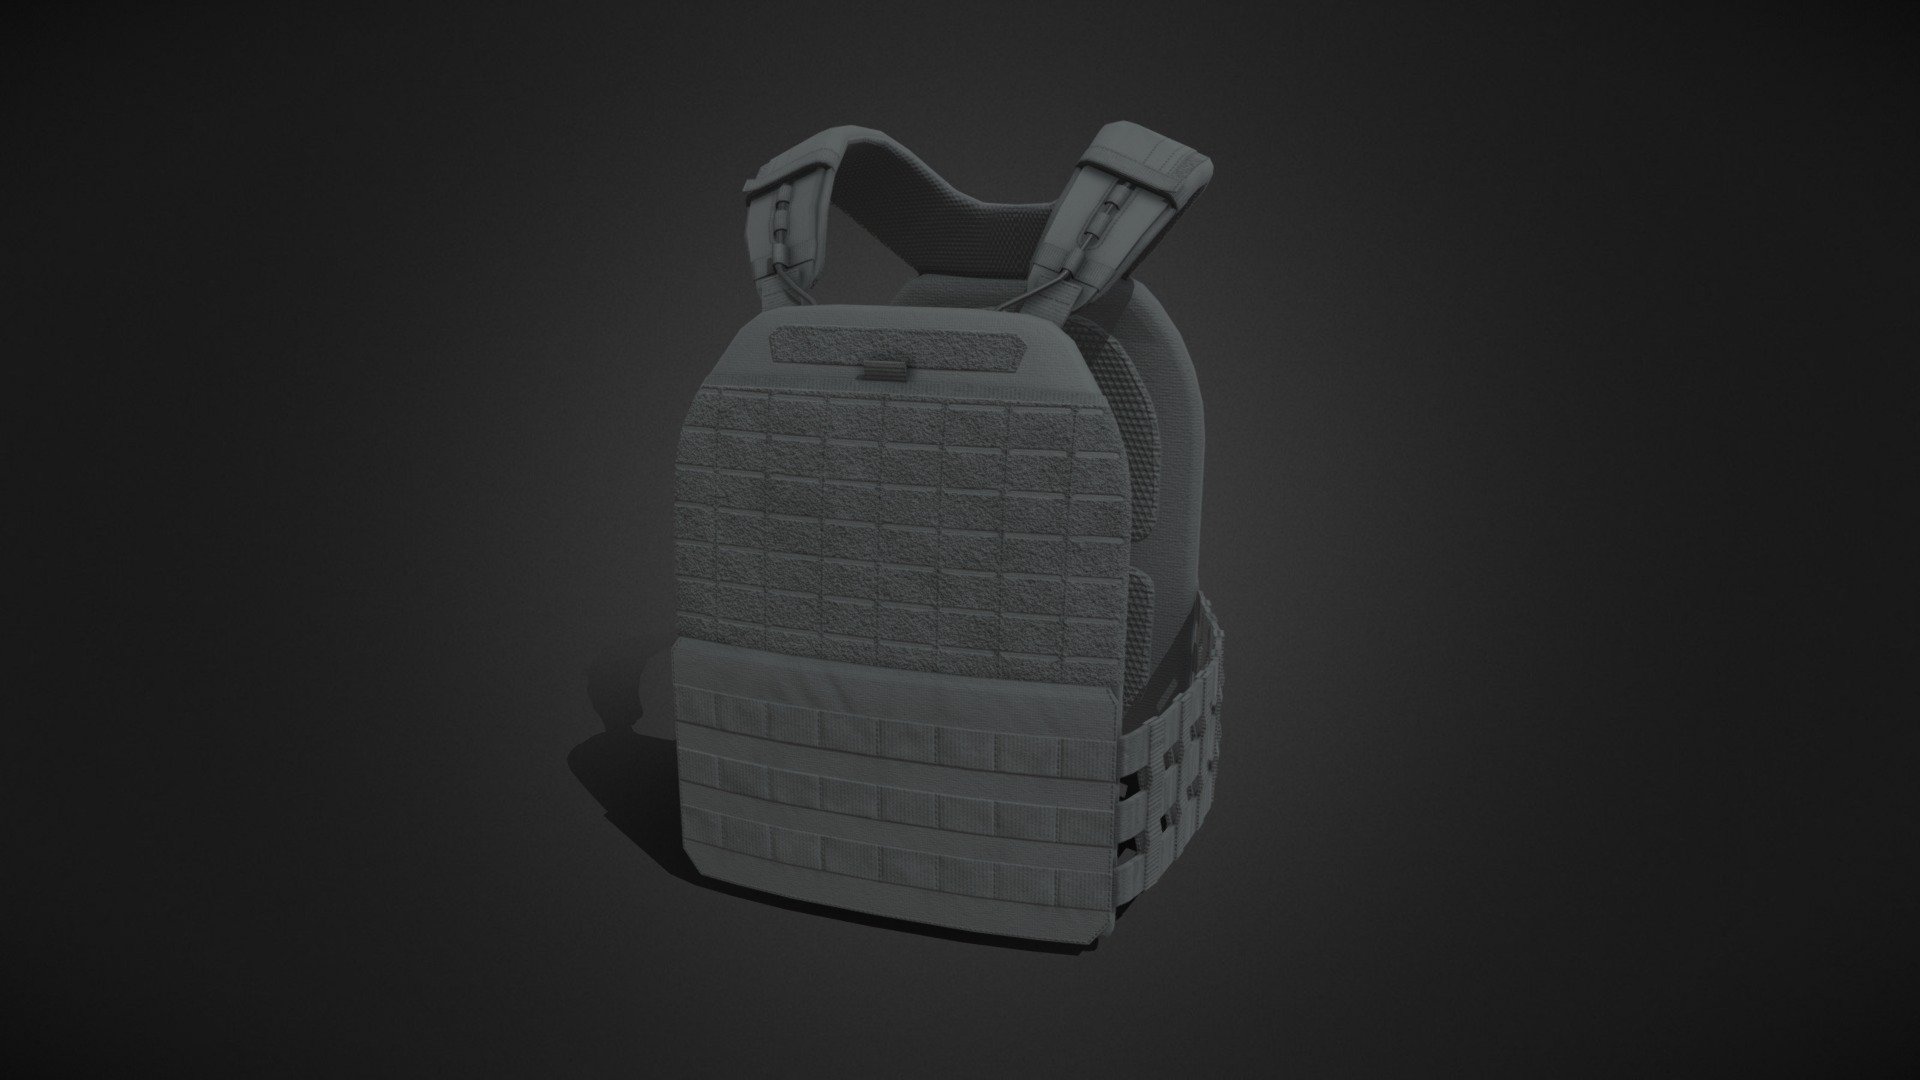 Plate carrier widely used in military/police service, as well as fitness competitions 3d model